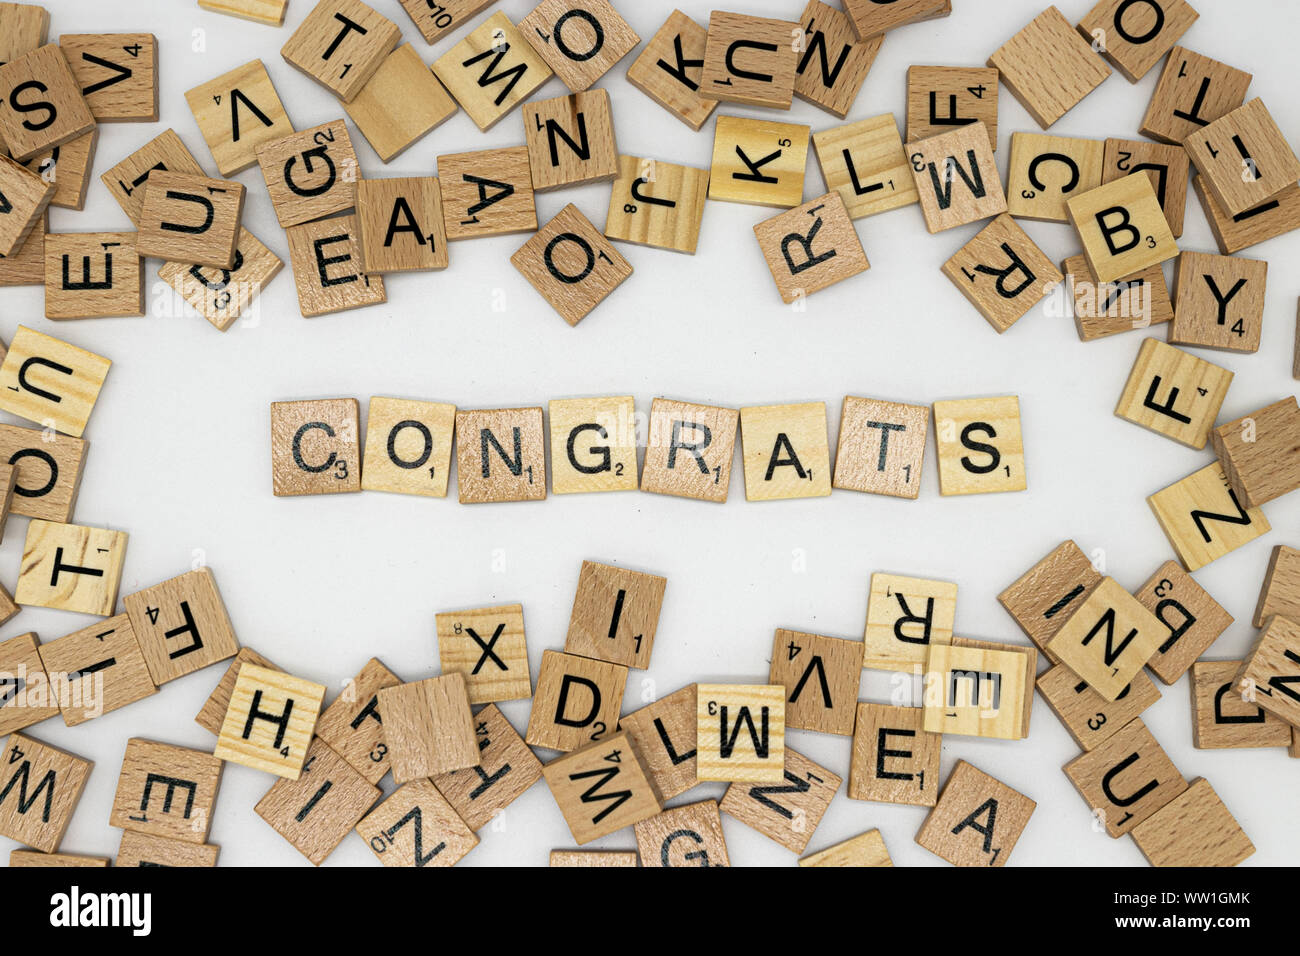 Congratulations message spelt in scrabble letters surrounded by various tiles Stock Photo